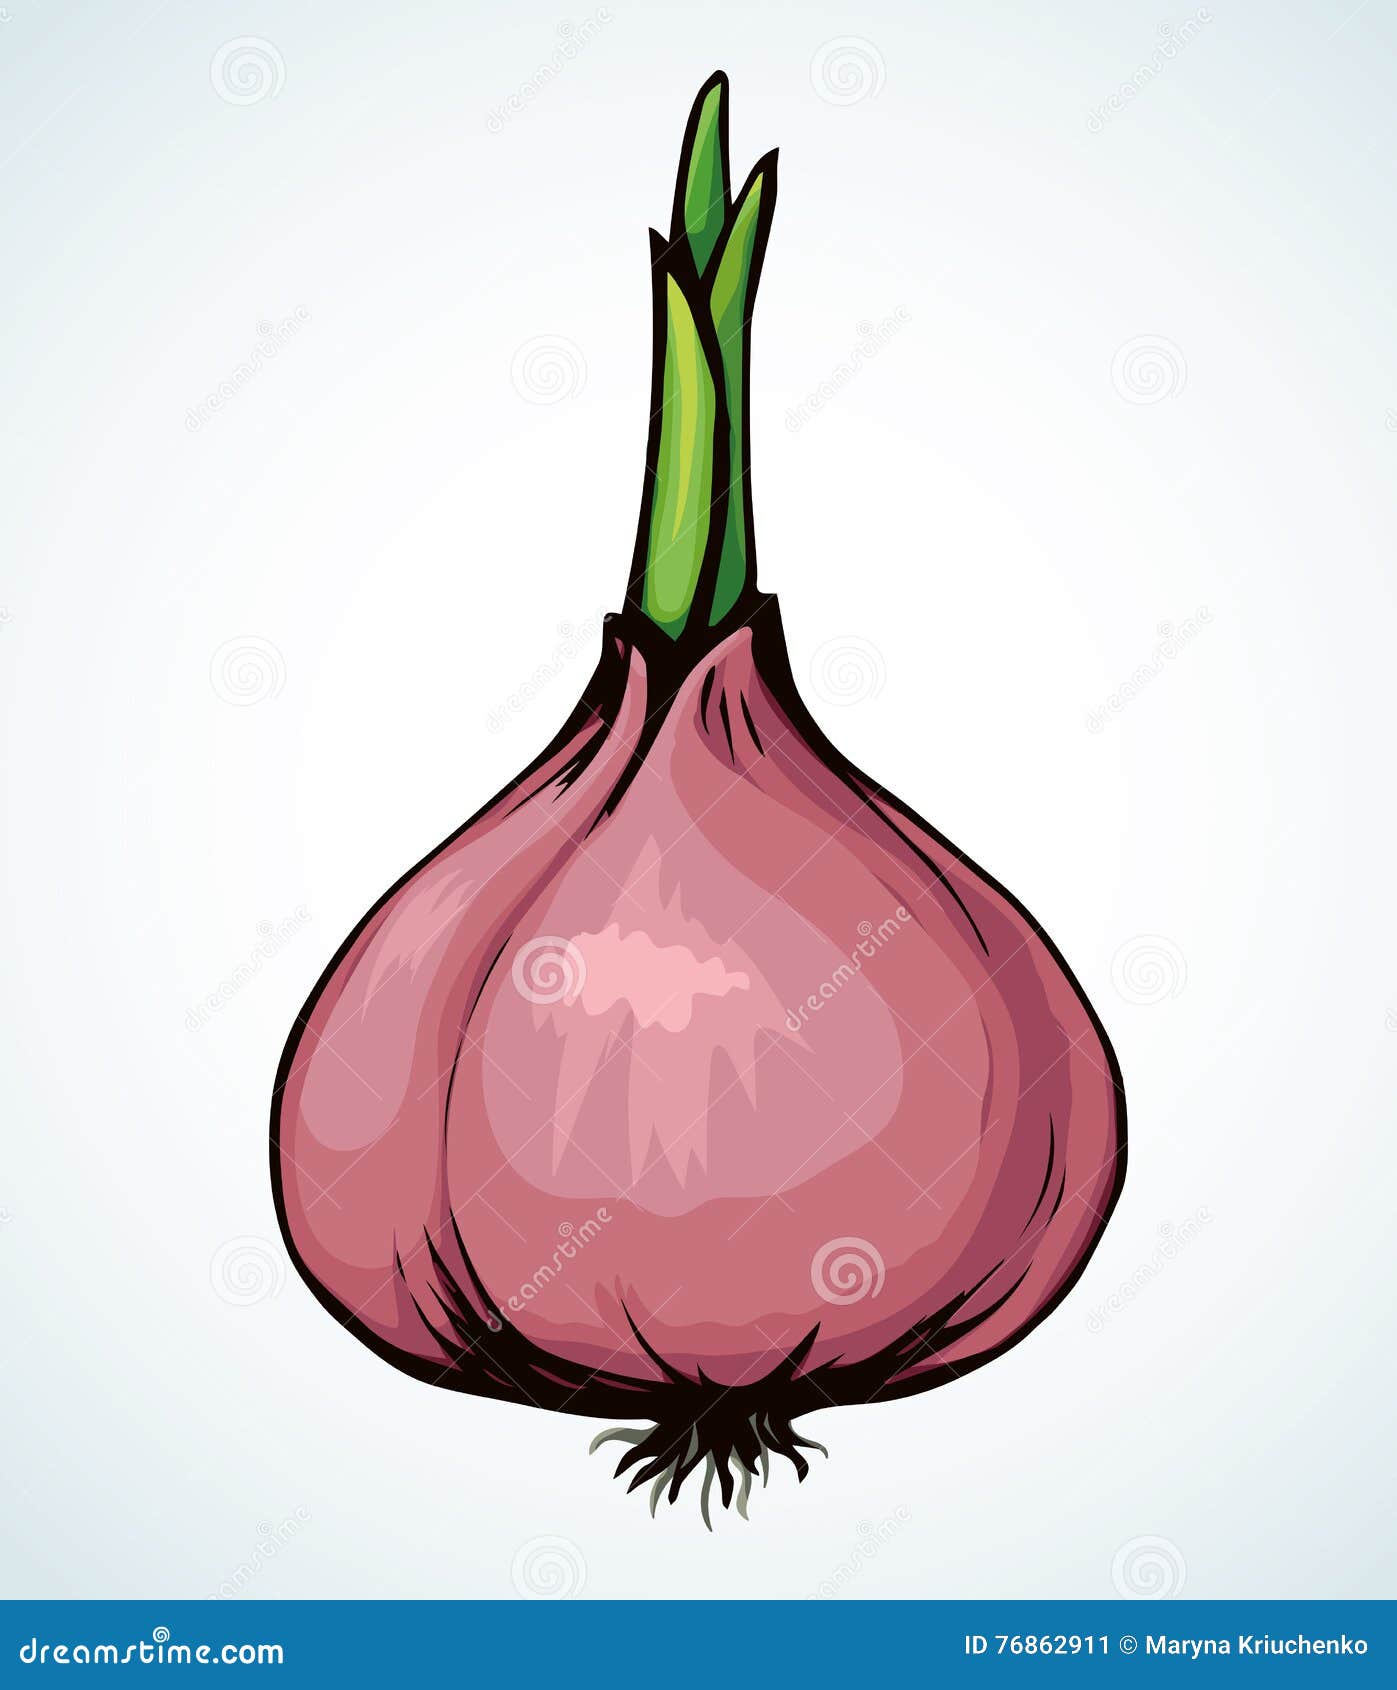 How to draw an onion - YouTube